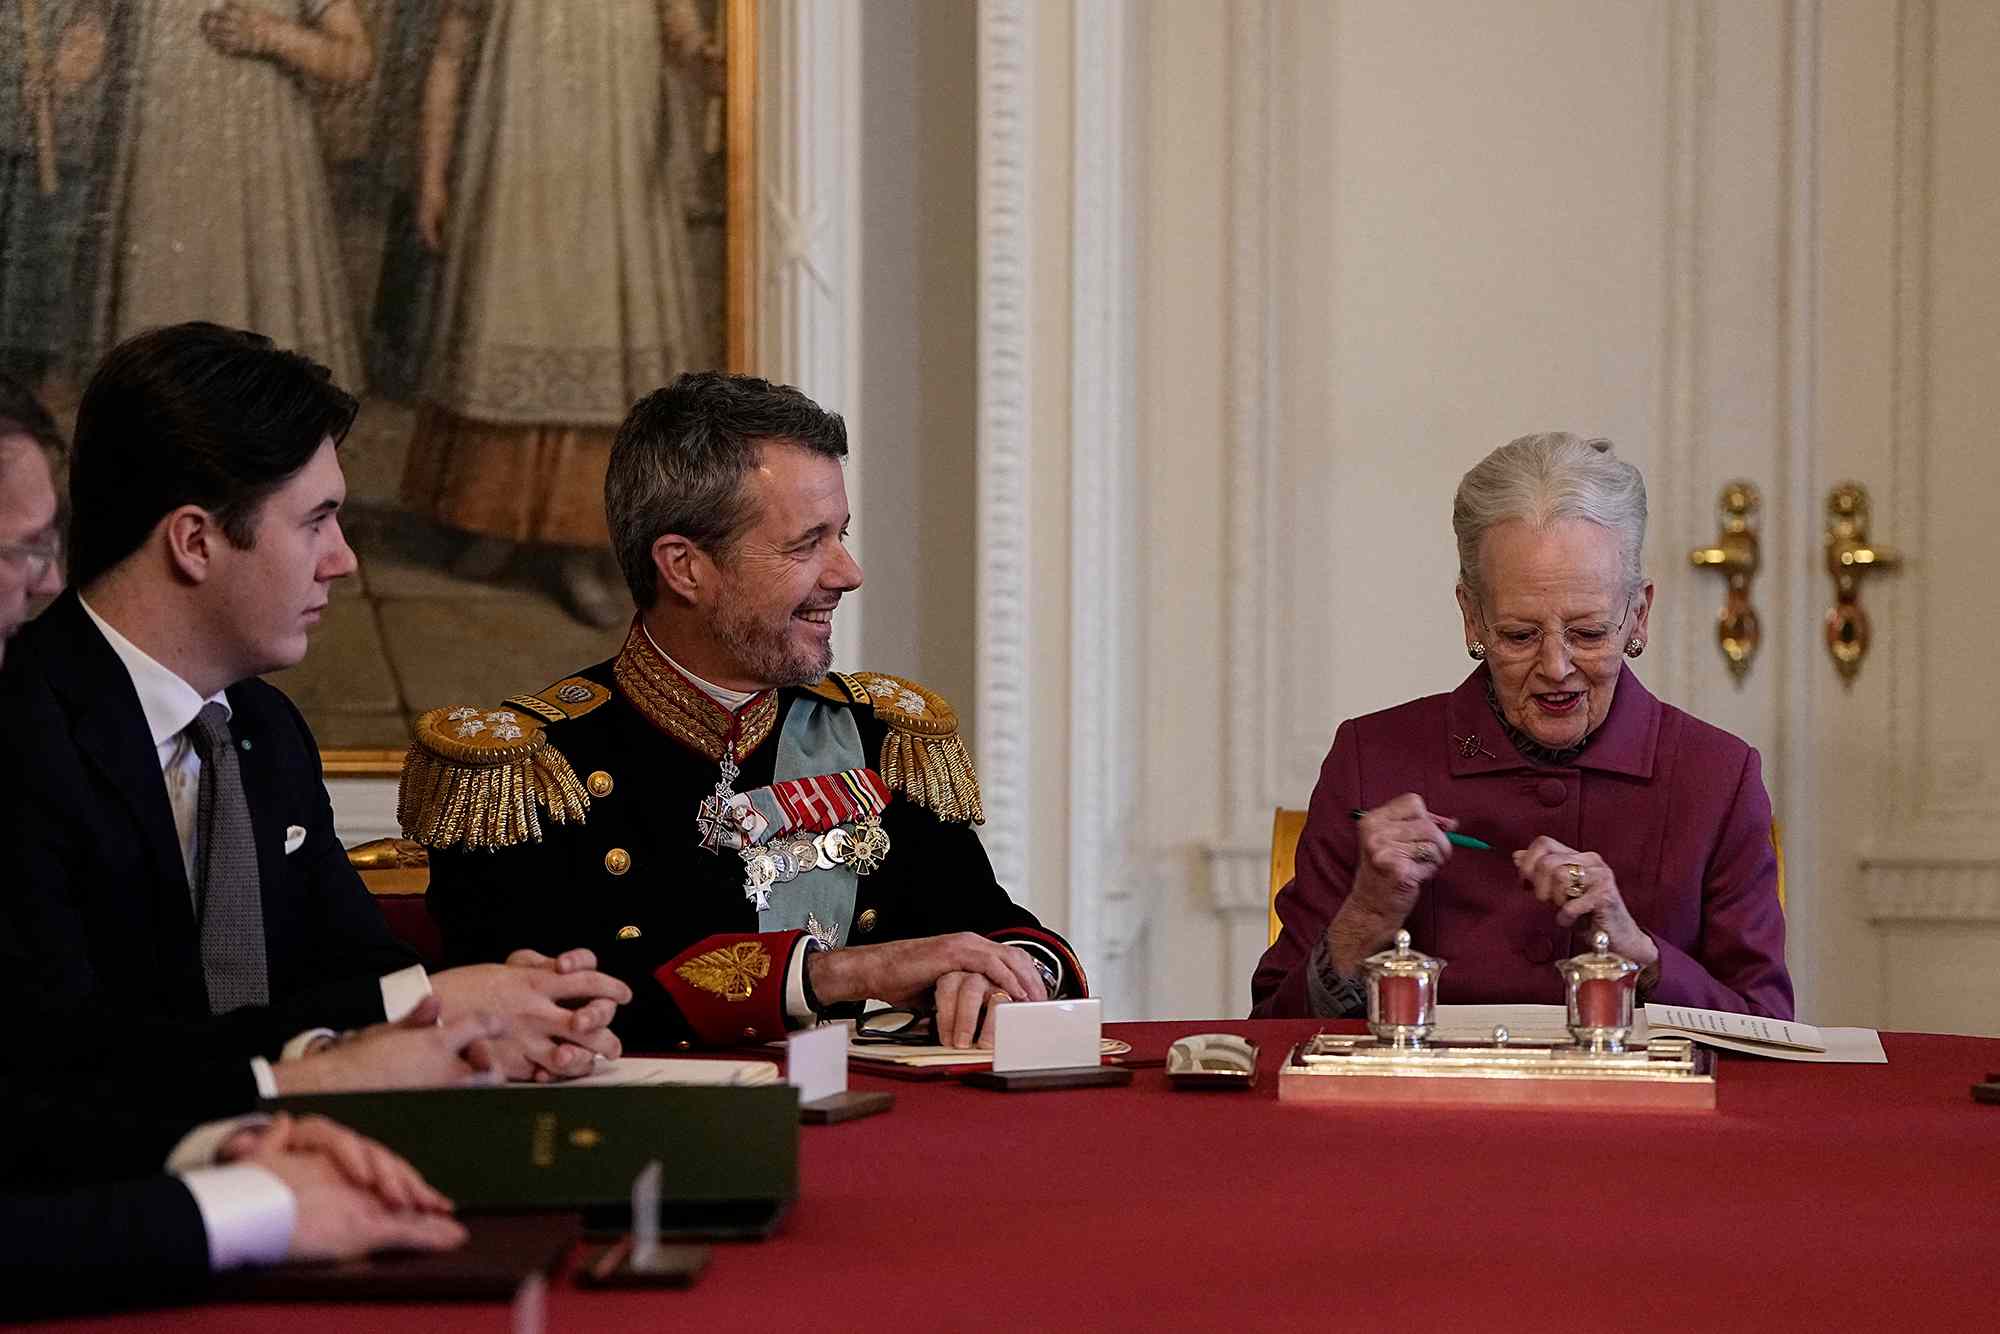 Queen Margrethe II of Denmark (R) signs a declaration of abdication as Crown Prince Frederik of Denmark (C) becomes King Frederik X of Denmark and Prince Christian of Denmark reacts in the Council of State at the Christiansborg Castle in Copenhagen, Denmark